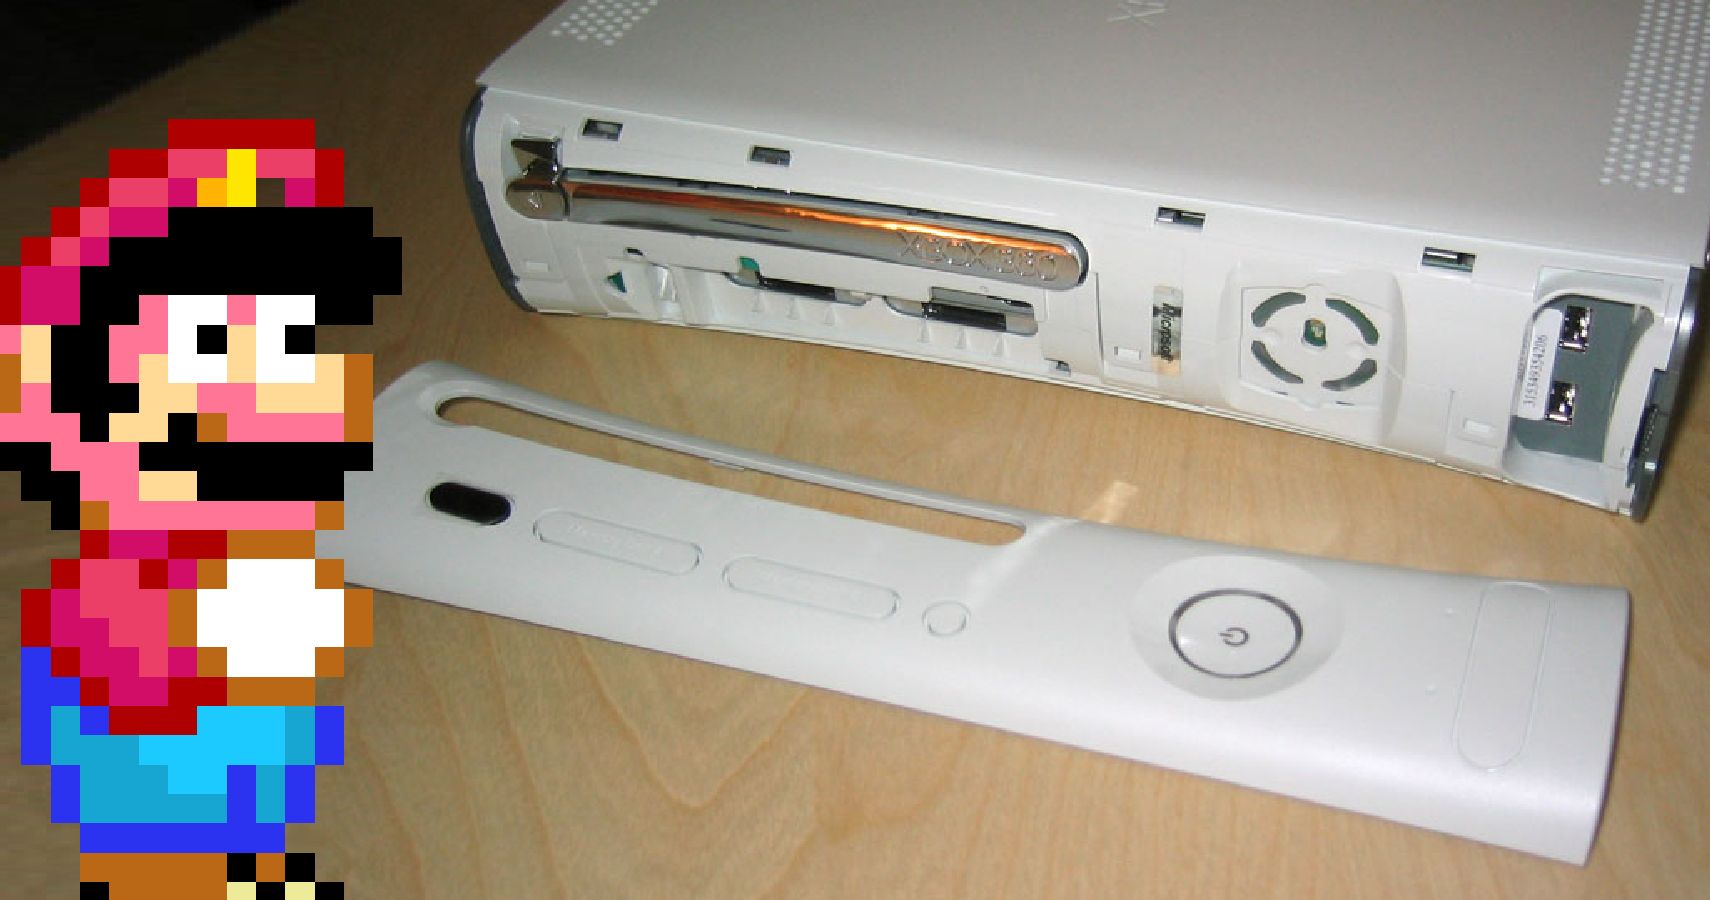 25 Cool Things Casuals Had No Idea Their Old Game Consoles Could Do